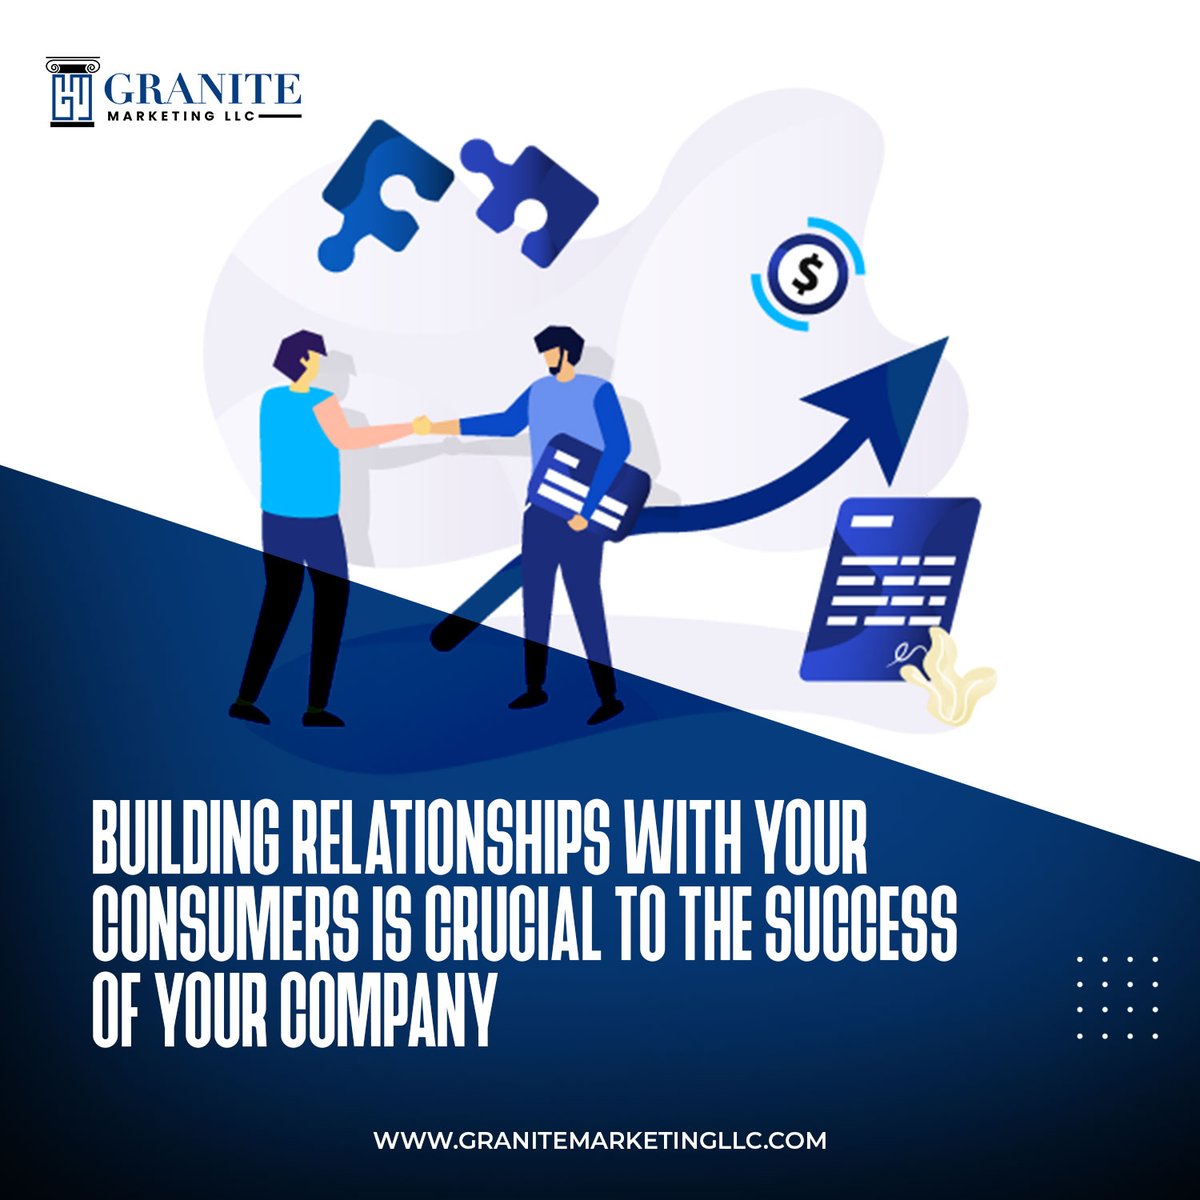 Contact Granite Marketing right away if you're interested in learning more about using social media with your business. #socialmediamarketing

#brandpurpose #adcampaign #twitteradvertising #brandmarketing #brandstrategy #digitalmarketing #marketing #socialmediamarketing #seo